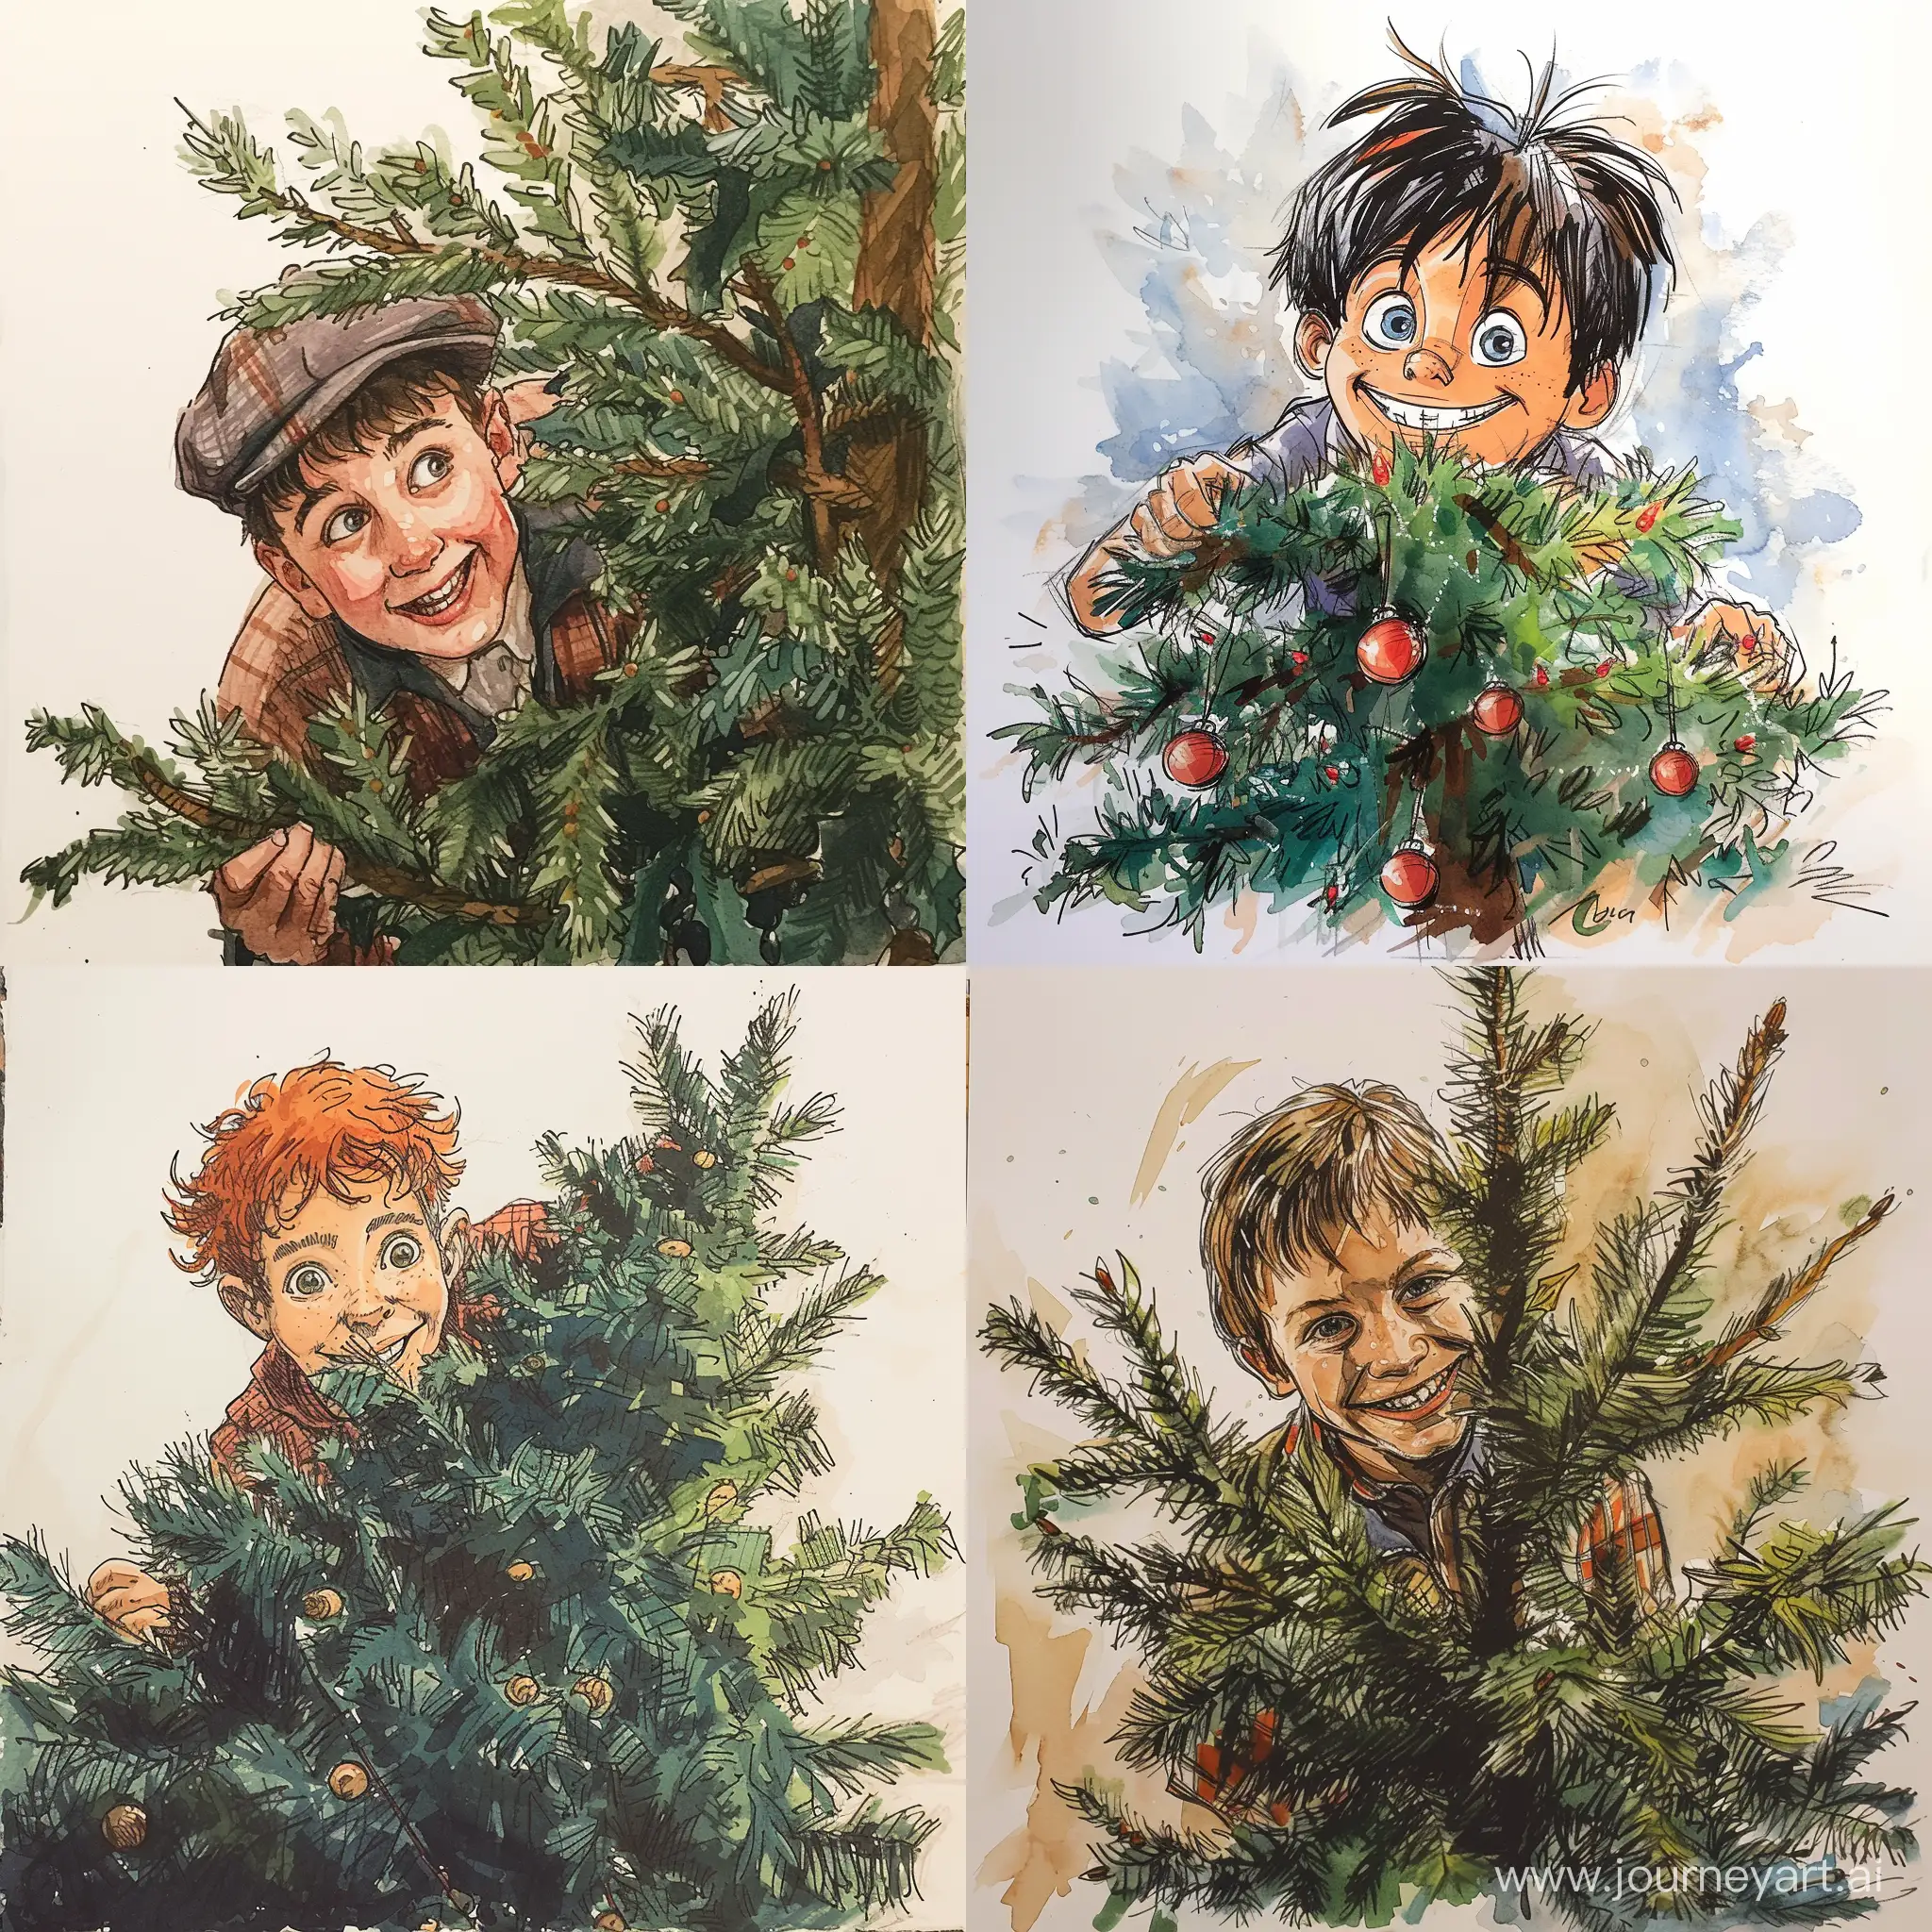 Mischievous-Boy-Hiding-Behind-Christmas-Tree-Colored-Ink-Drawing